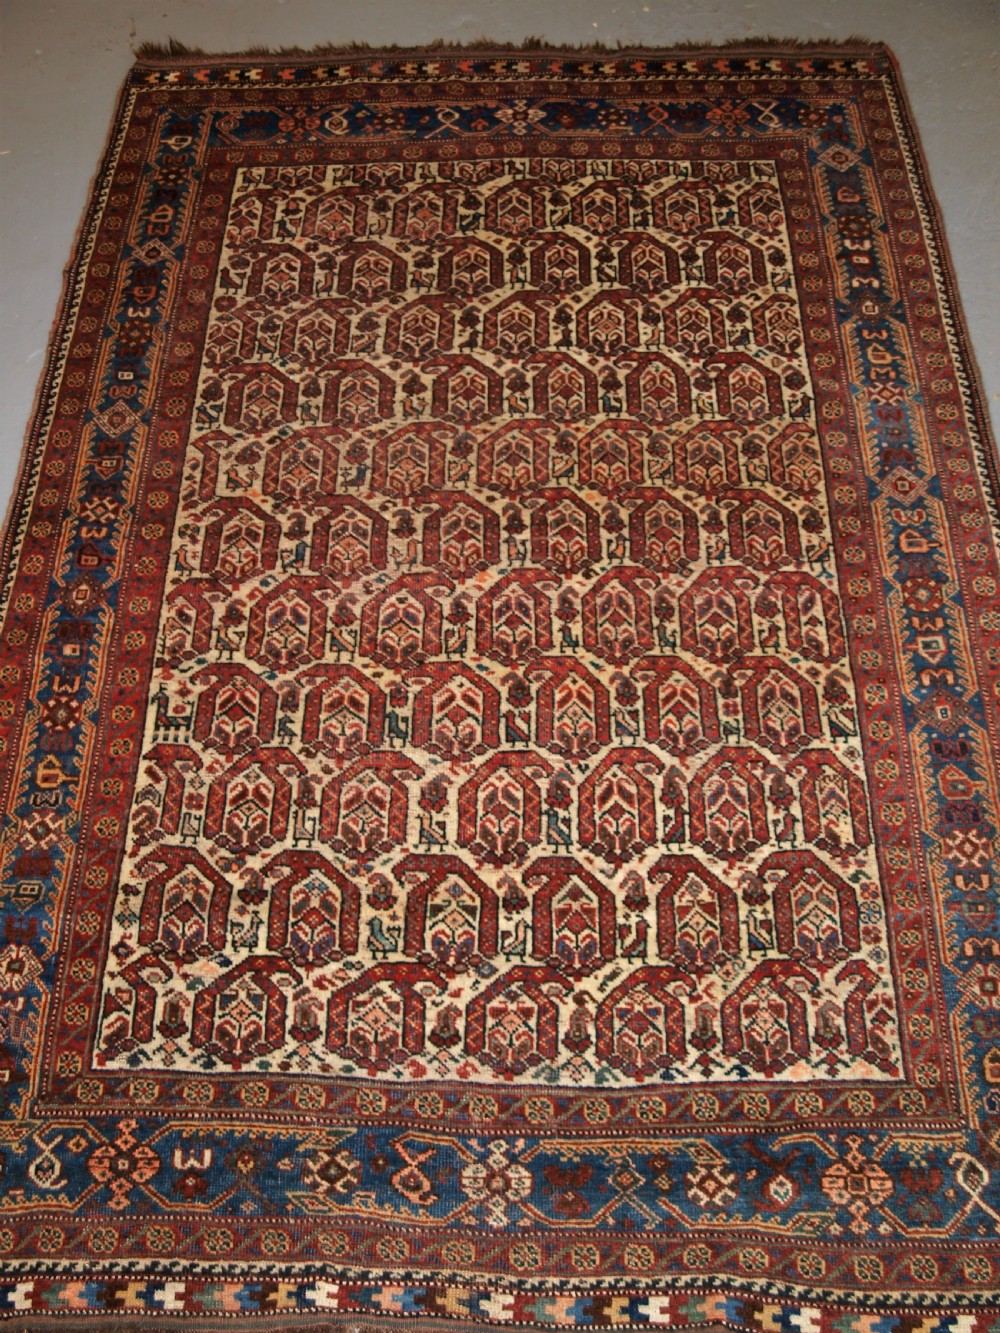 antique rug by the khamseh tribe all over boteh design on an ivory field circa 1900